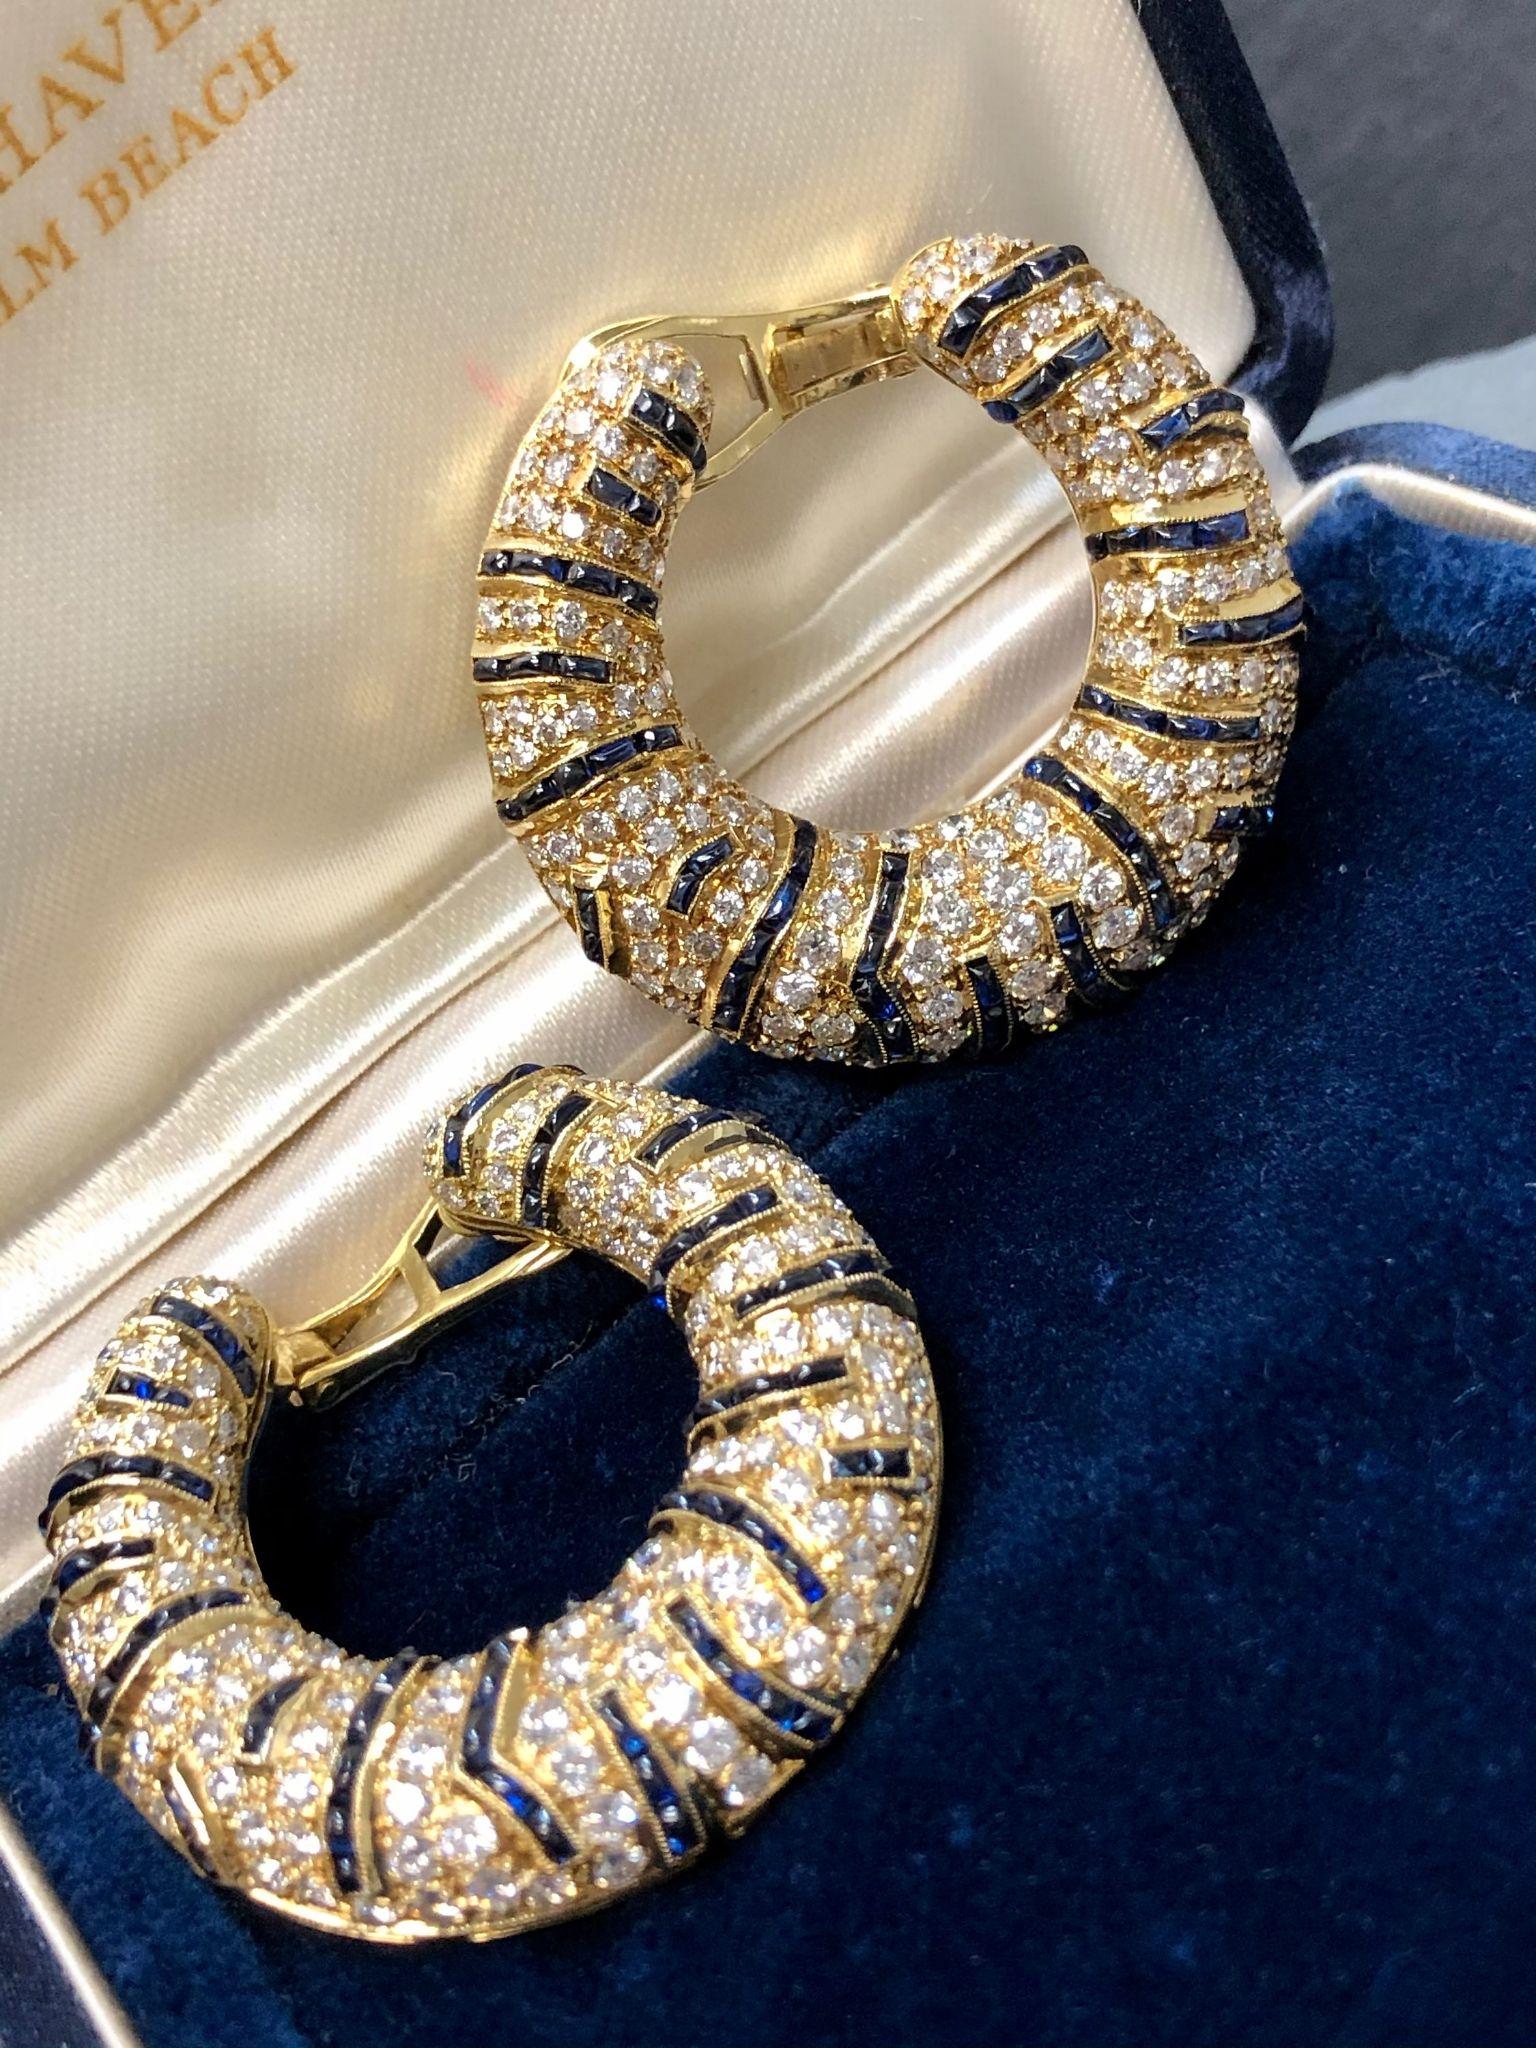 A fabulous pair of lever-back hoop earrings done in 18K yellow gold set with approximately 6.40cttw in F-G color Vs1-2 clarity diamonds as well as approximately 5.45cttw in natural, buff-top sapphires.

Dimensions
Earrings measure 1.4” in